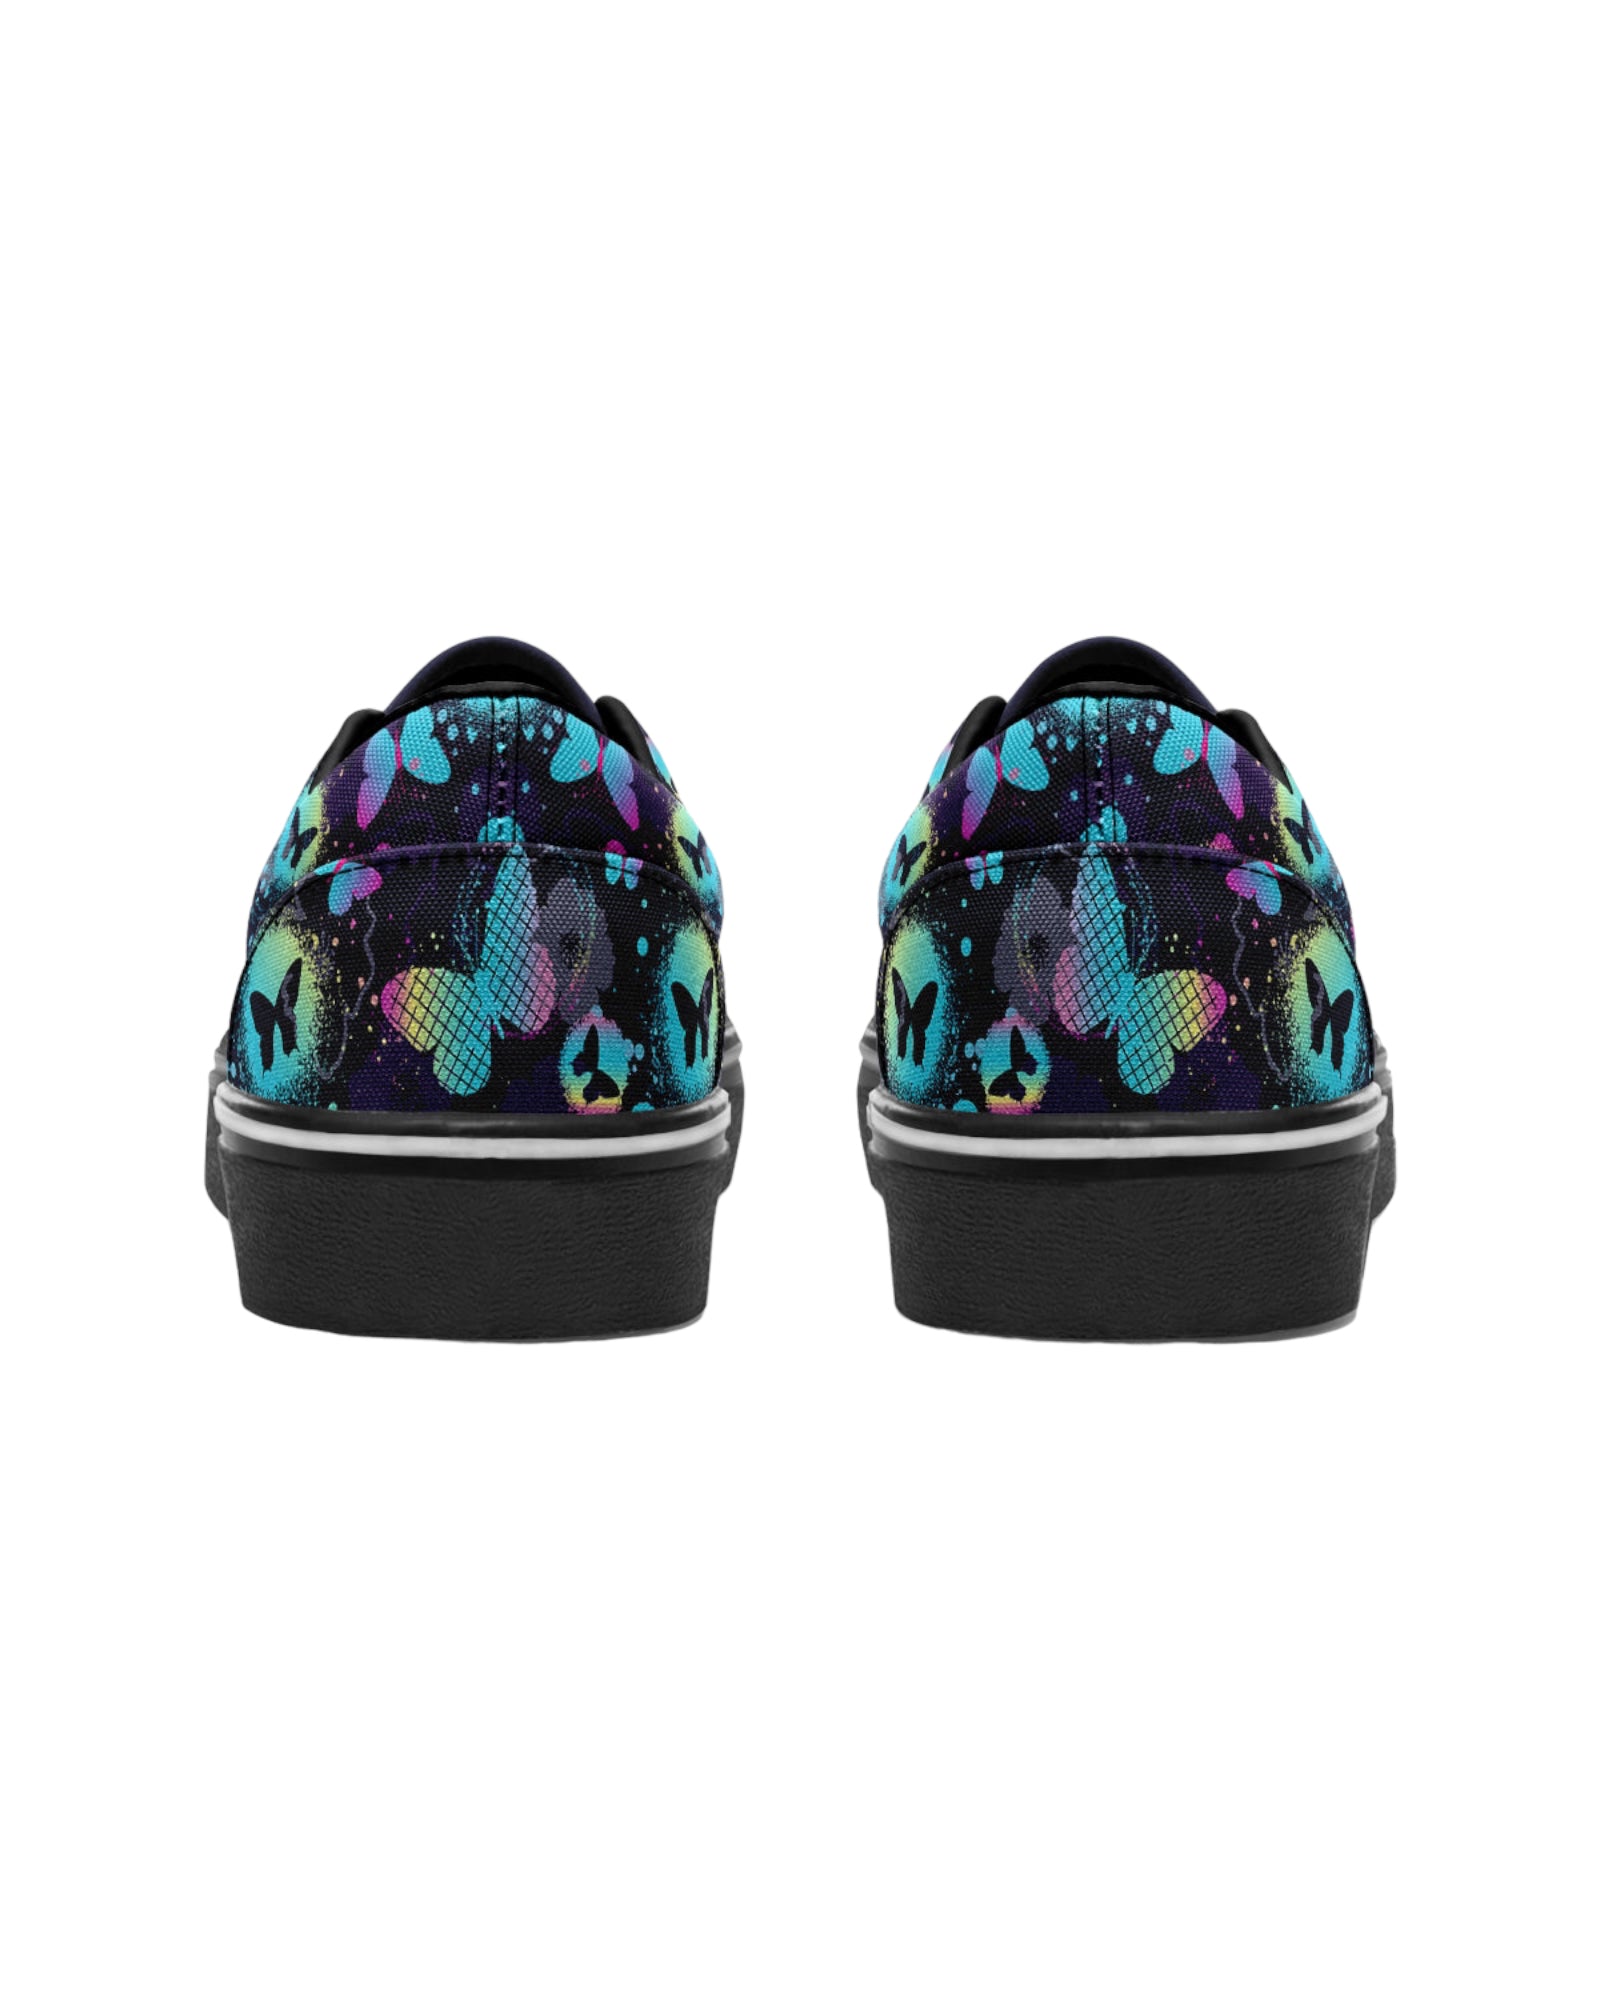 Painted Butterfly Festival Shoes